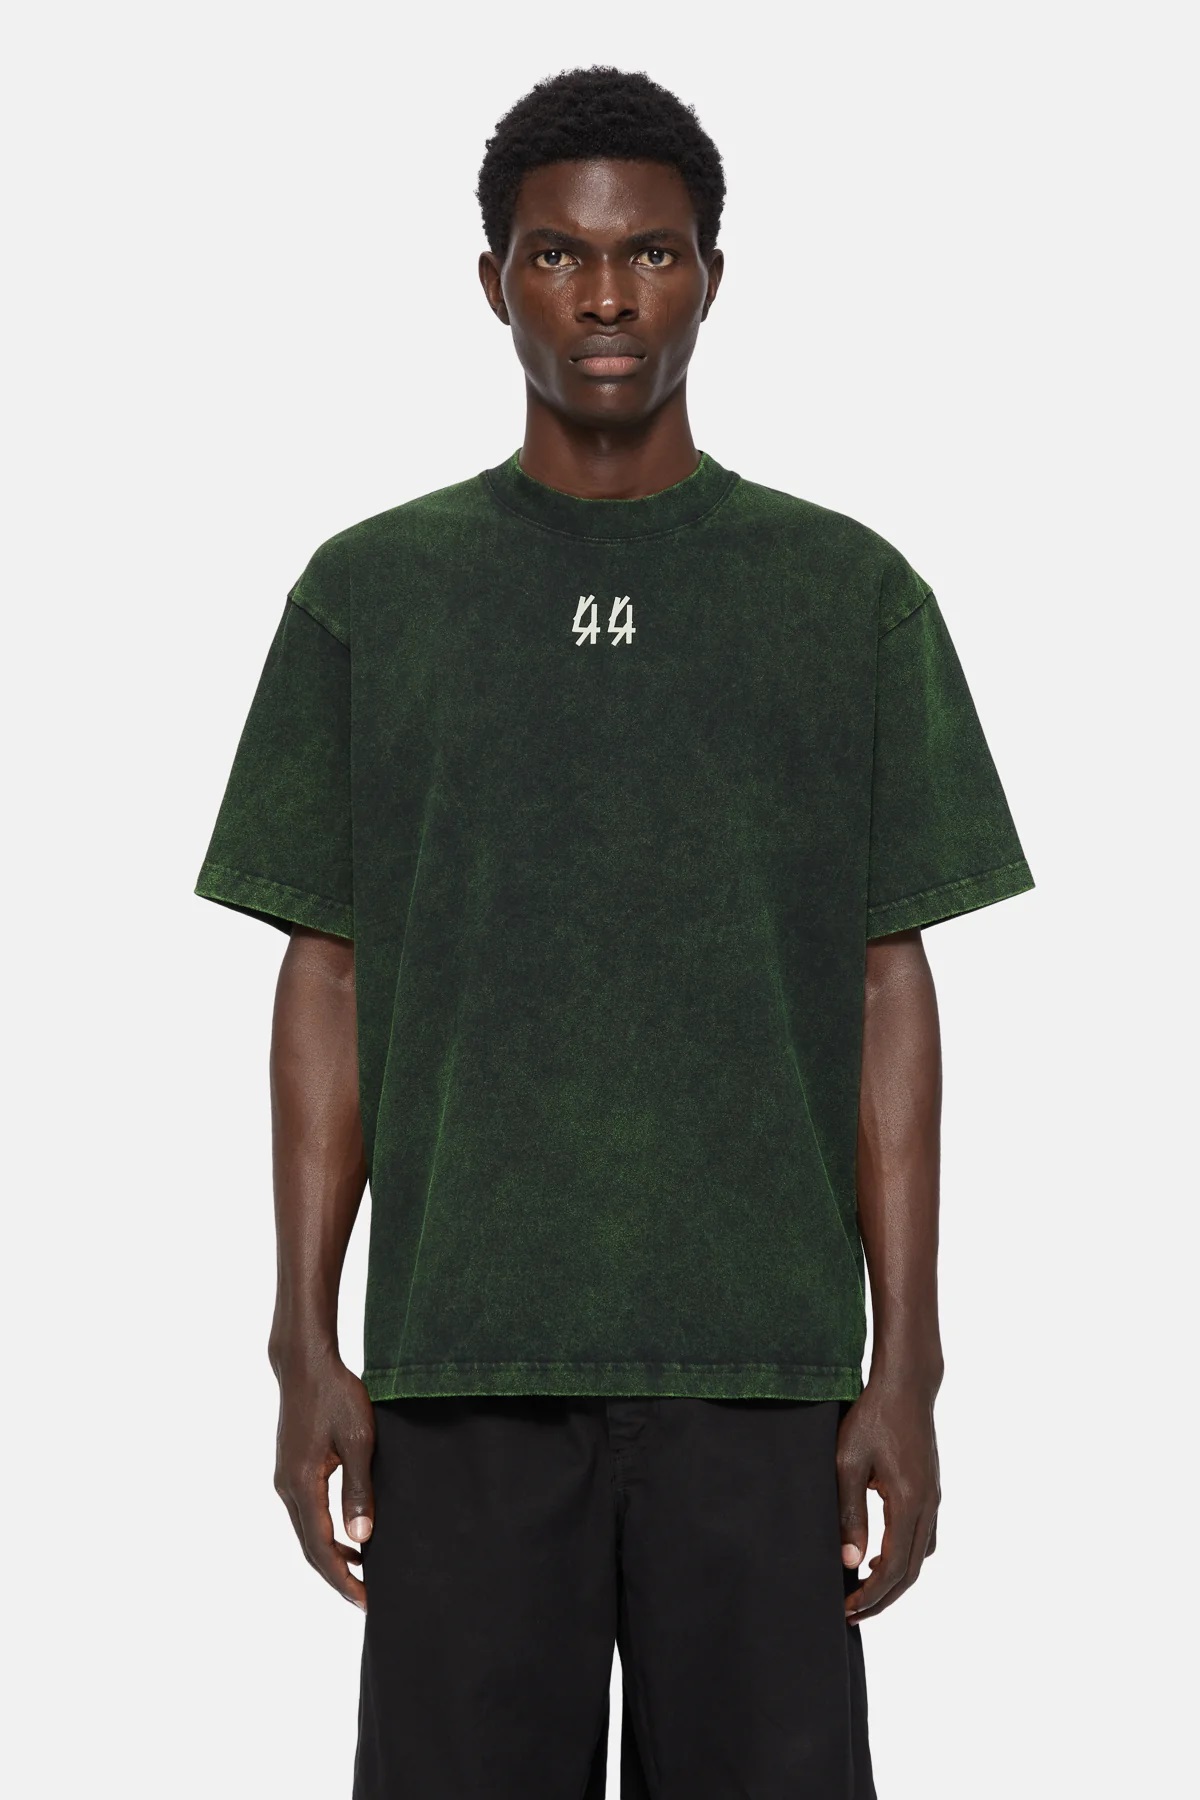 44 LABEL GROUP Overdied Solar Tee in Green 2XL